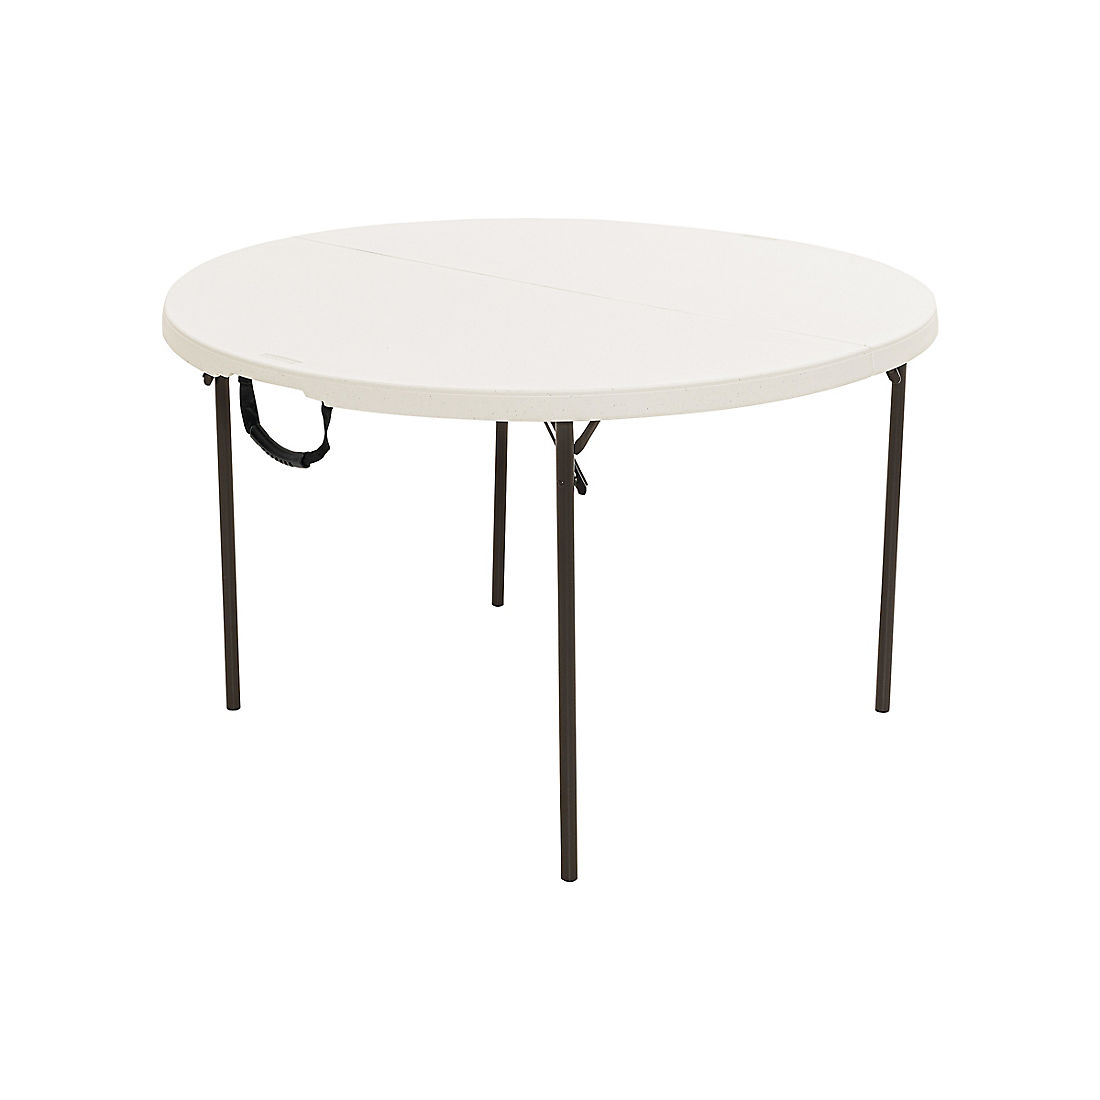 Lifetime Round Light Commercial Fold, 48 Inch Round Table Folding